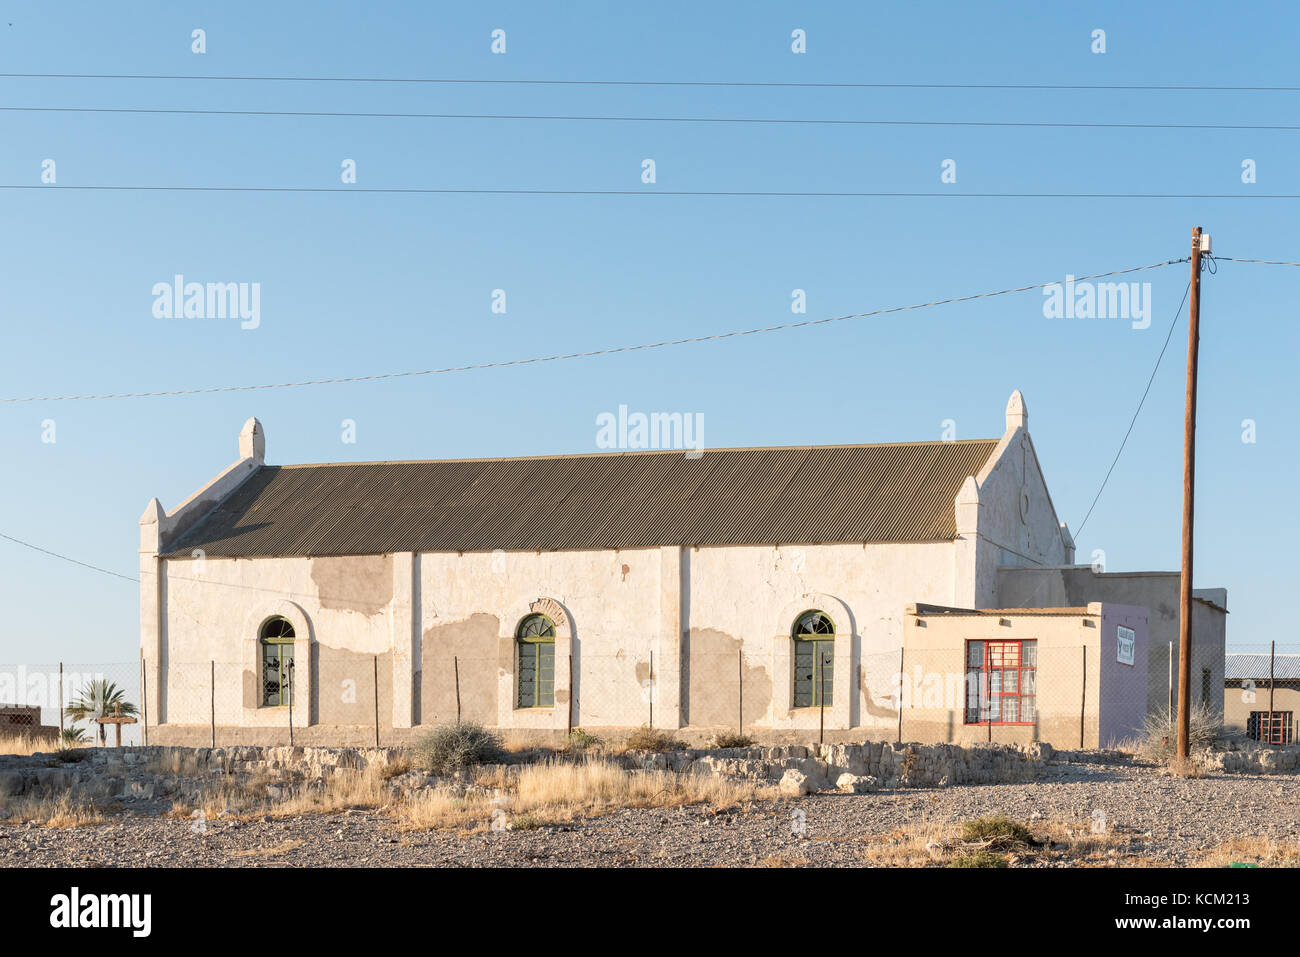 RIETFONTEIN, SOUTH AFRICA - JULY 6, 2017: An historic church at Rietfontein, a small town in the Northern Cape Province of South Africa on the border  Stock Photo